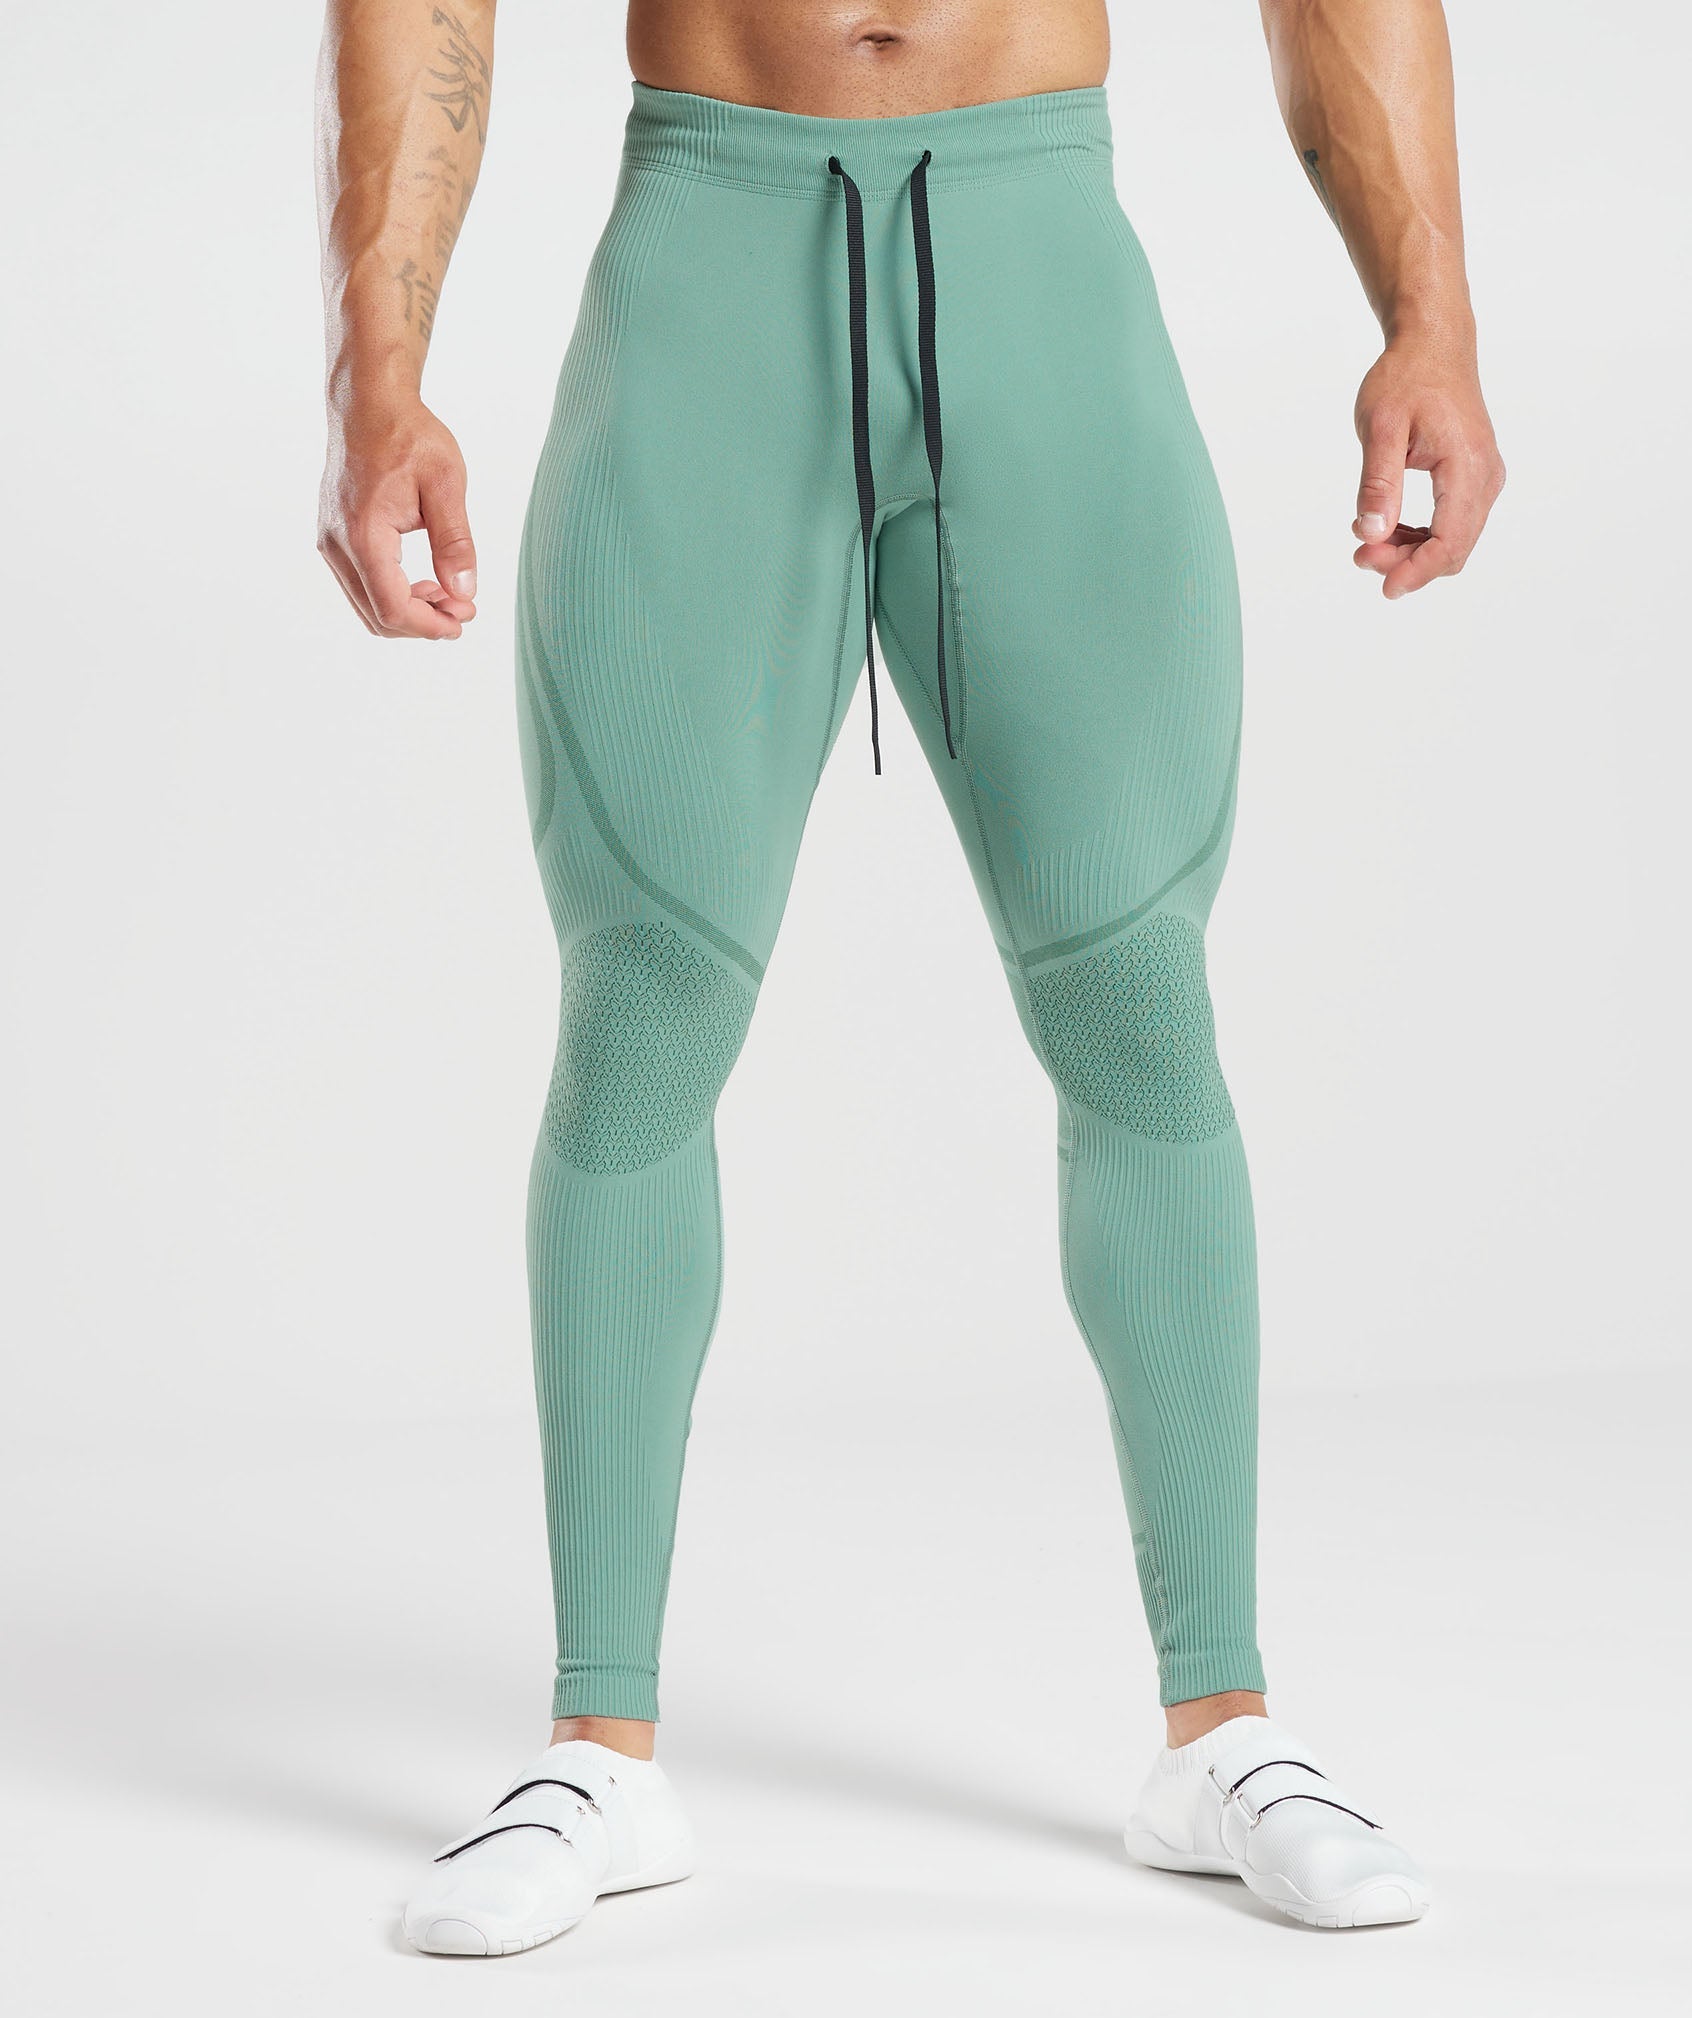 315 Seamless Tights in Ink Teal/Jewel Green - view 1